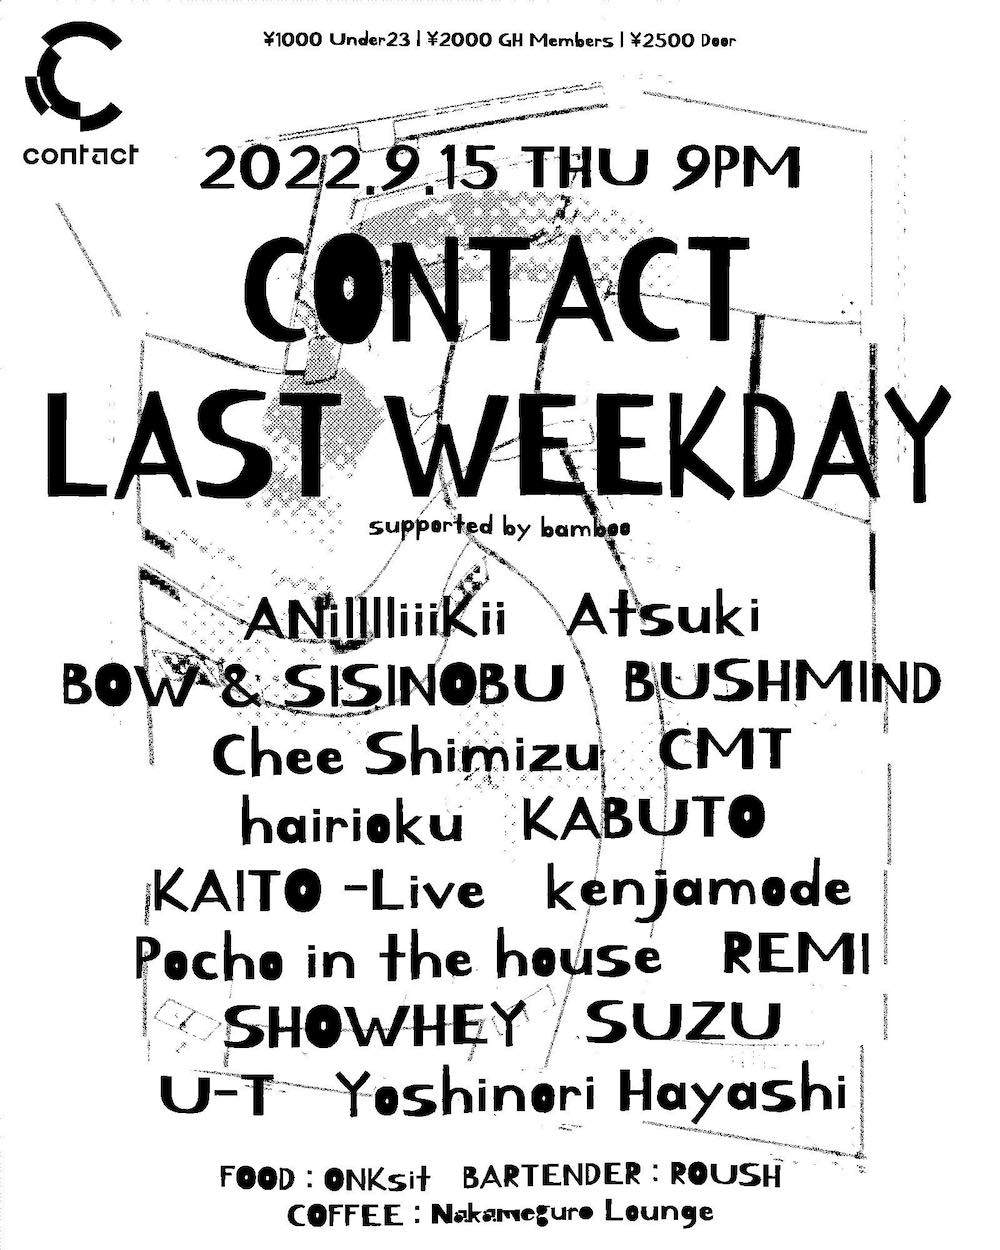 Contact LAST WEEKDAY supported by bamboo - フライヤー表